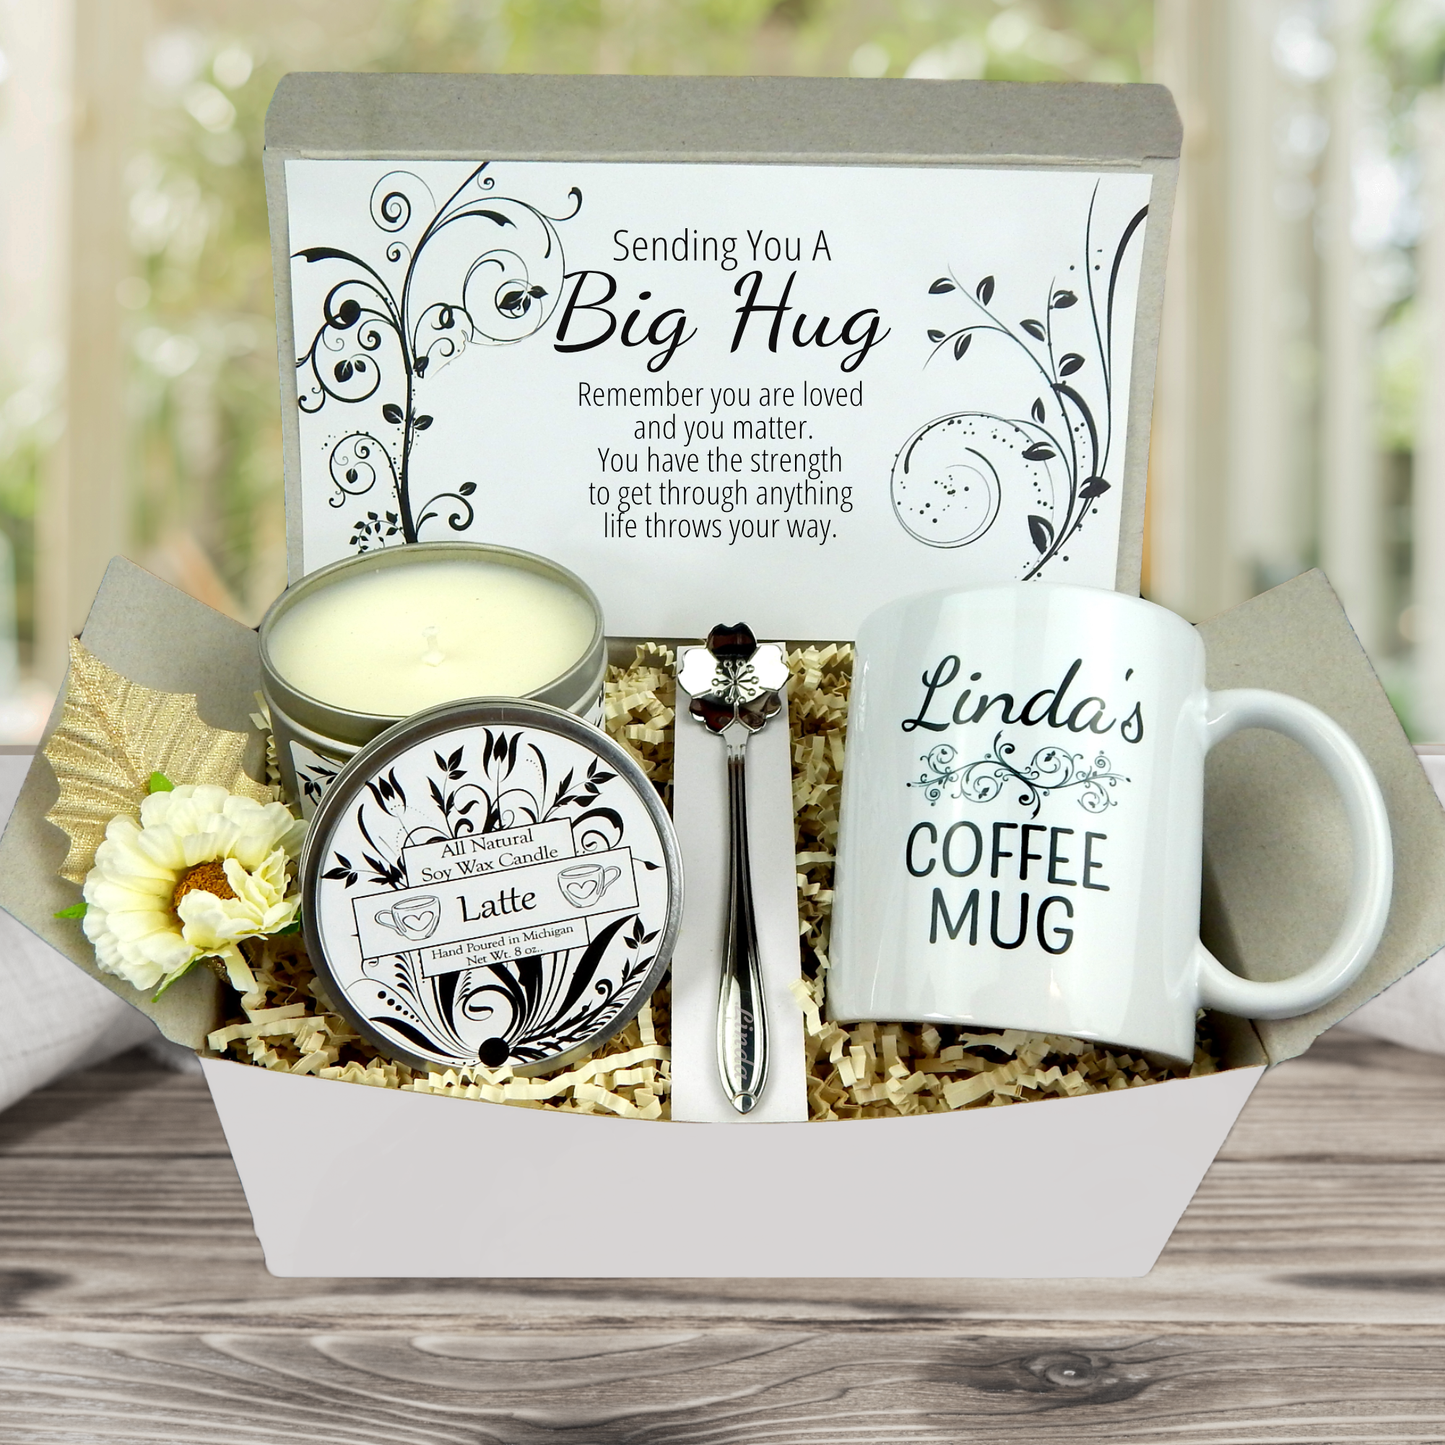 Hug In A Box Encouragement Gift - Thinking Of You Care Package - Self Care Basket